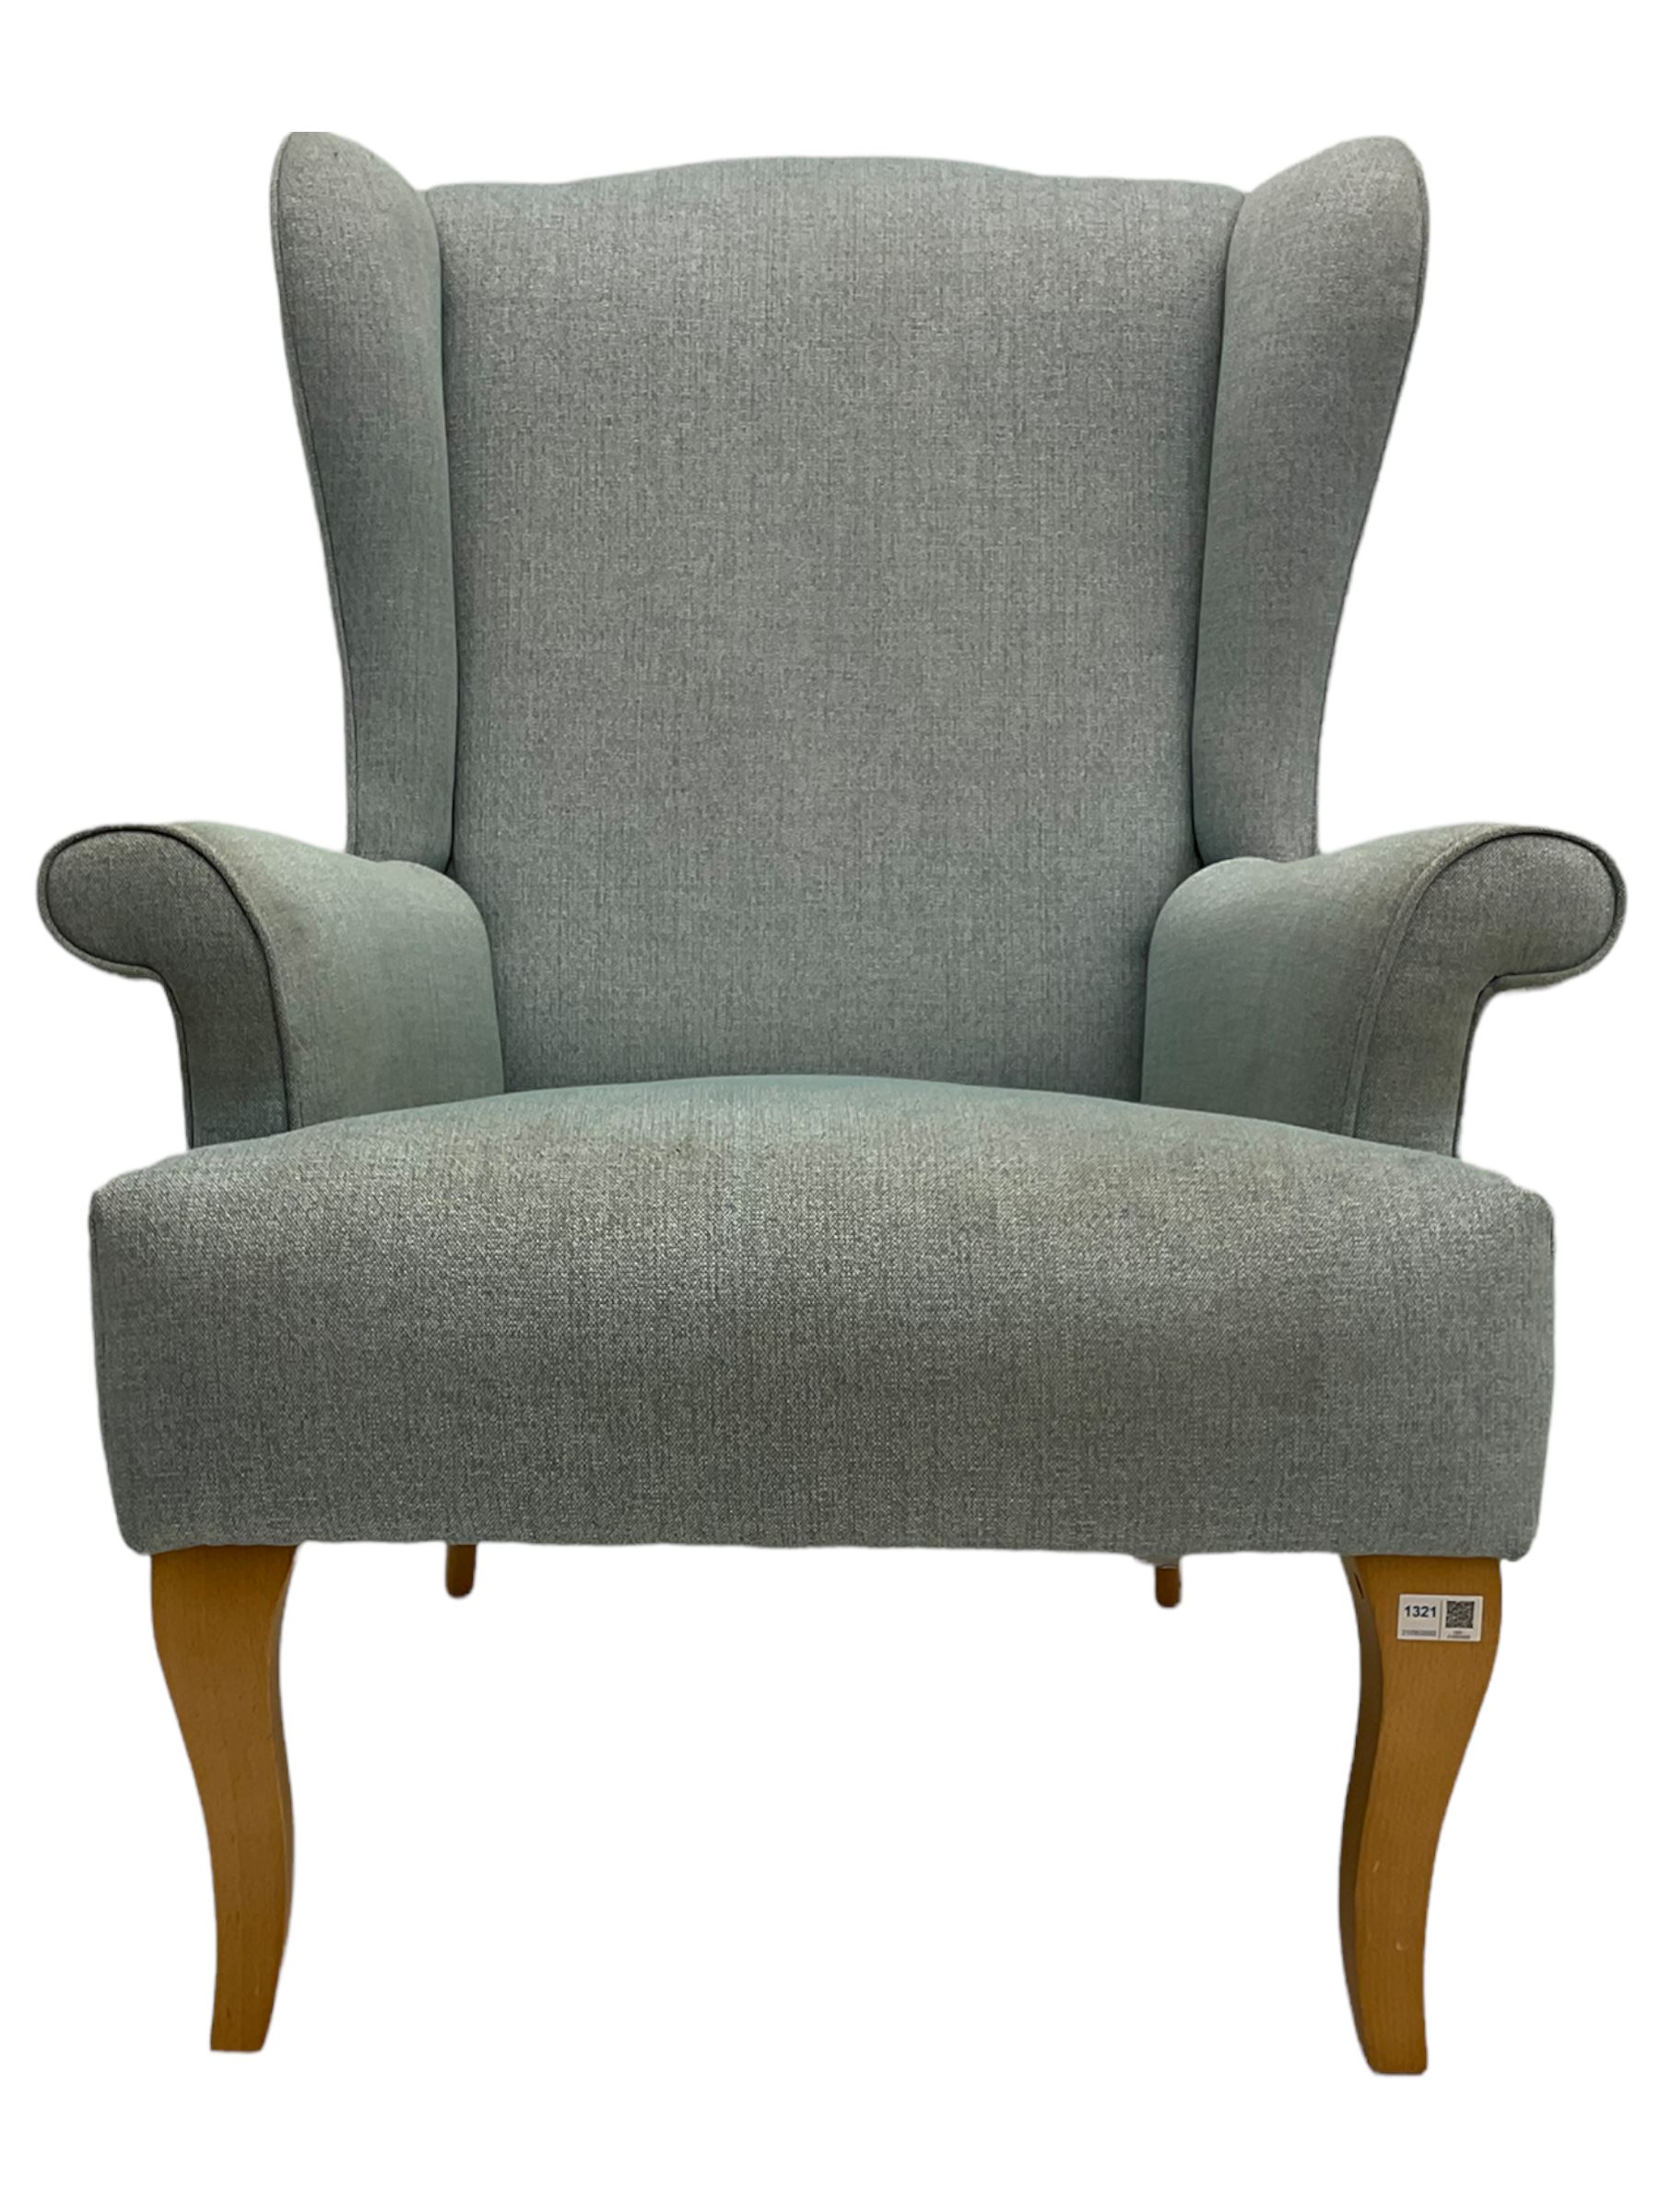 John Lewis high wing back armchair upholstered in denim cover - Image 3 of 6